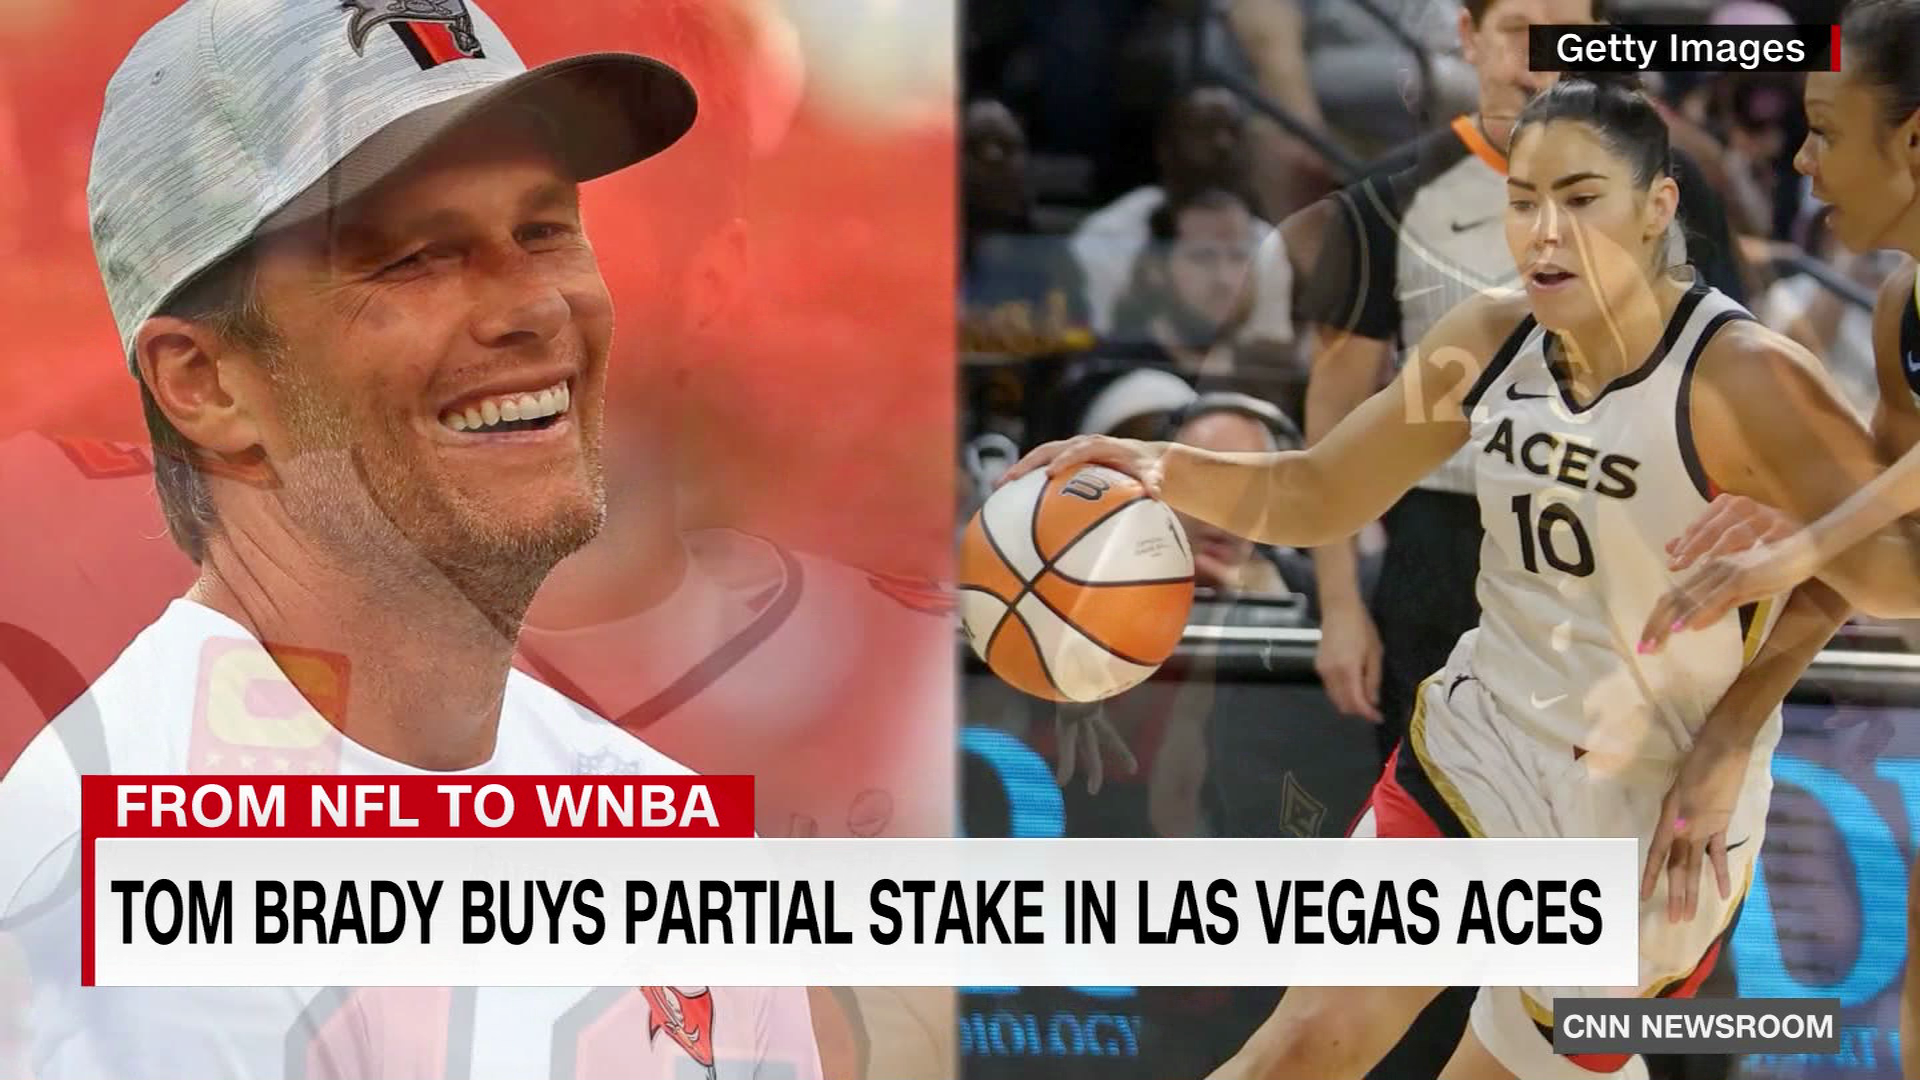 Tom Brady becomes part owner of the WNBA's Las Vegas Aces